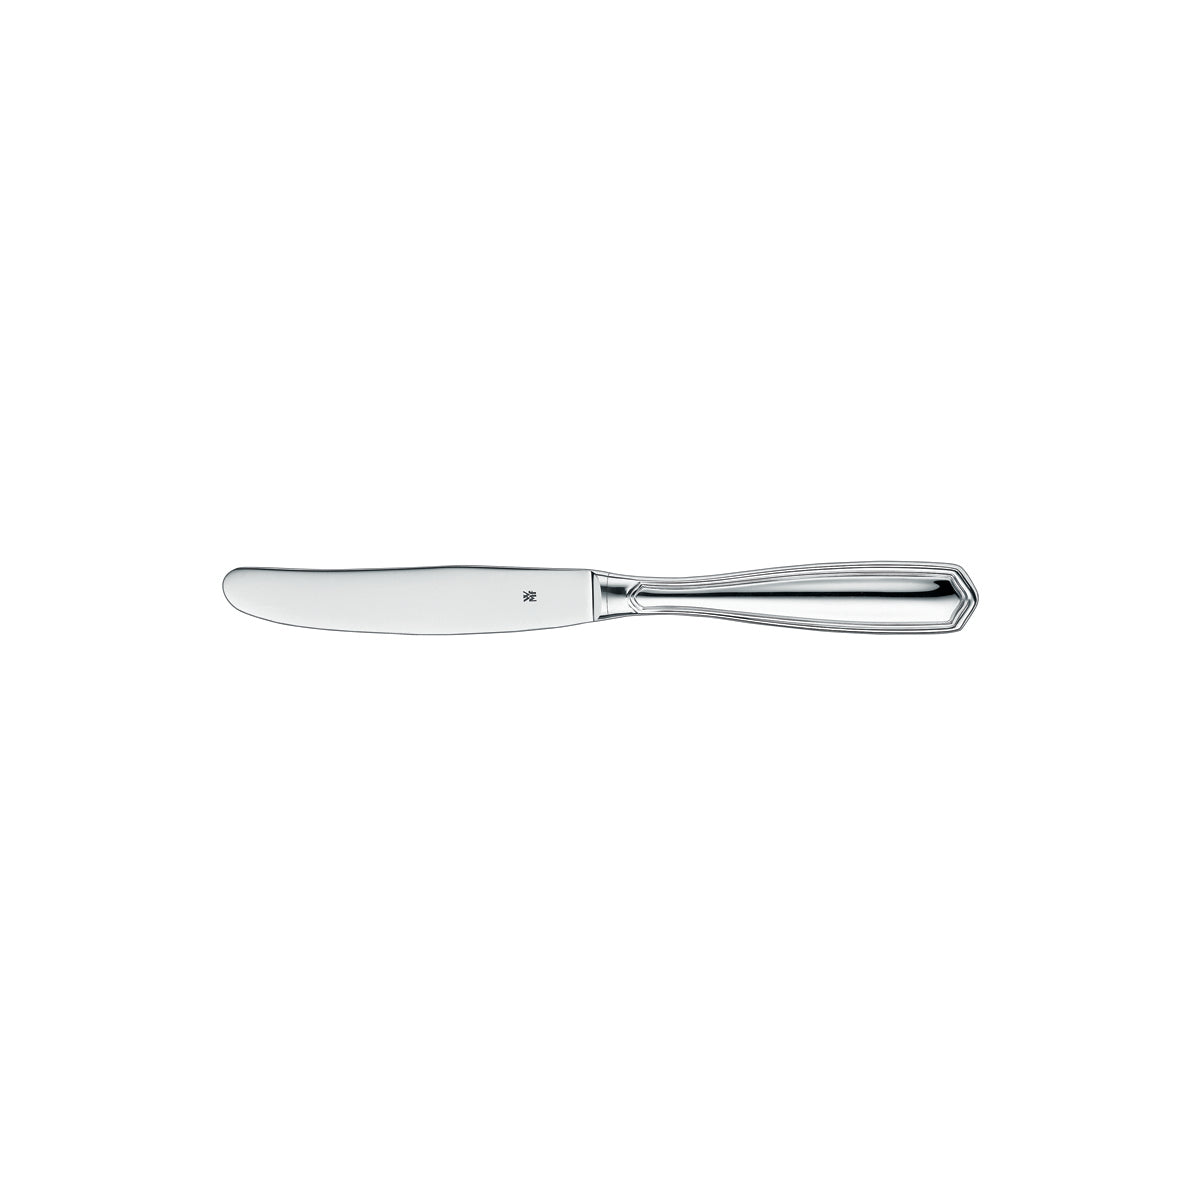 12.4803.6047 WMF Residence Table Knife - Hollow Handle Stainless Steel Tomkin Australia Hospitality Supplies